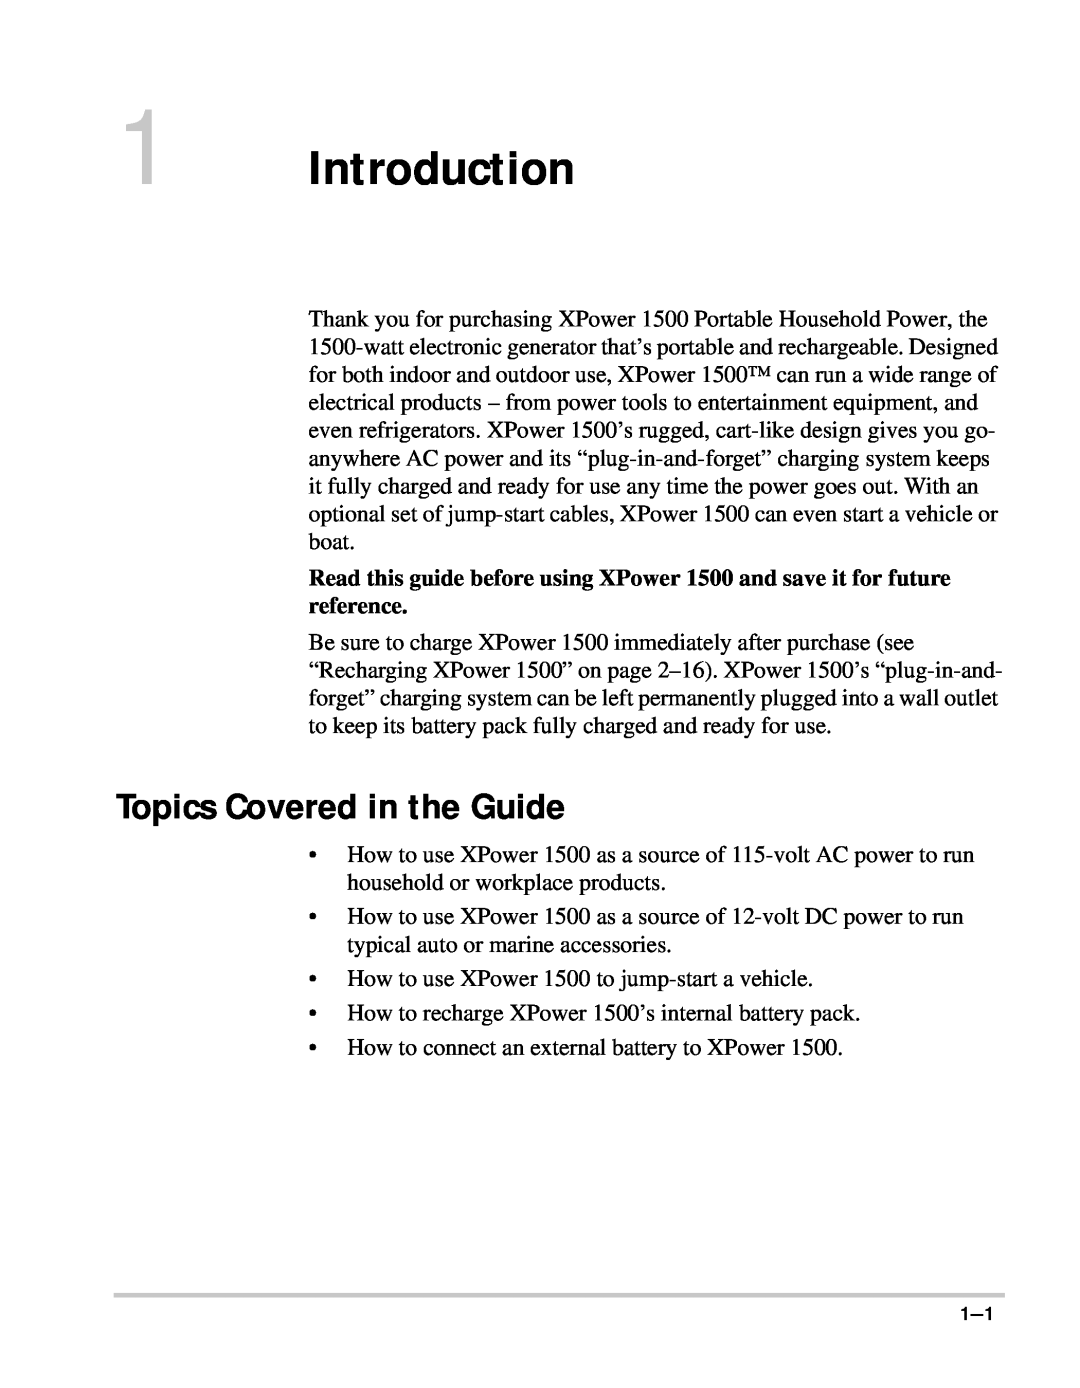 Xantrex Technology 1500 manual Introduction, Topics Covered in the Guide 